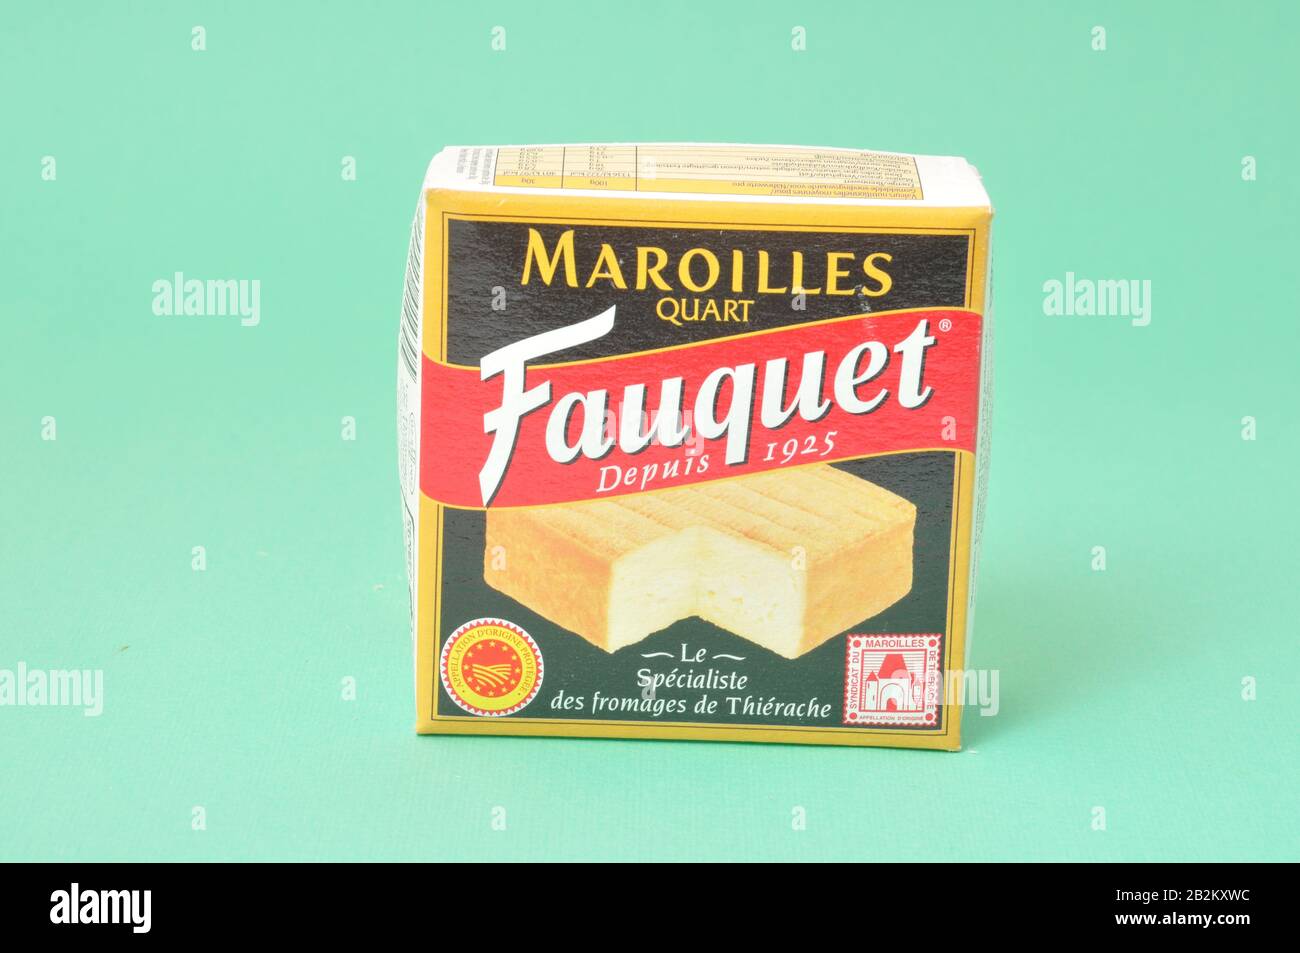 Maroilles, french cheese Stock Photo